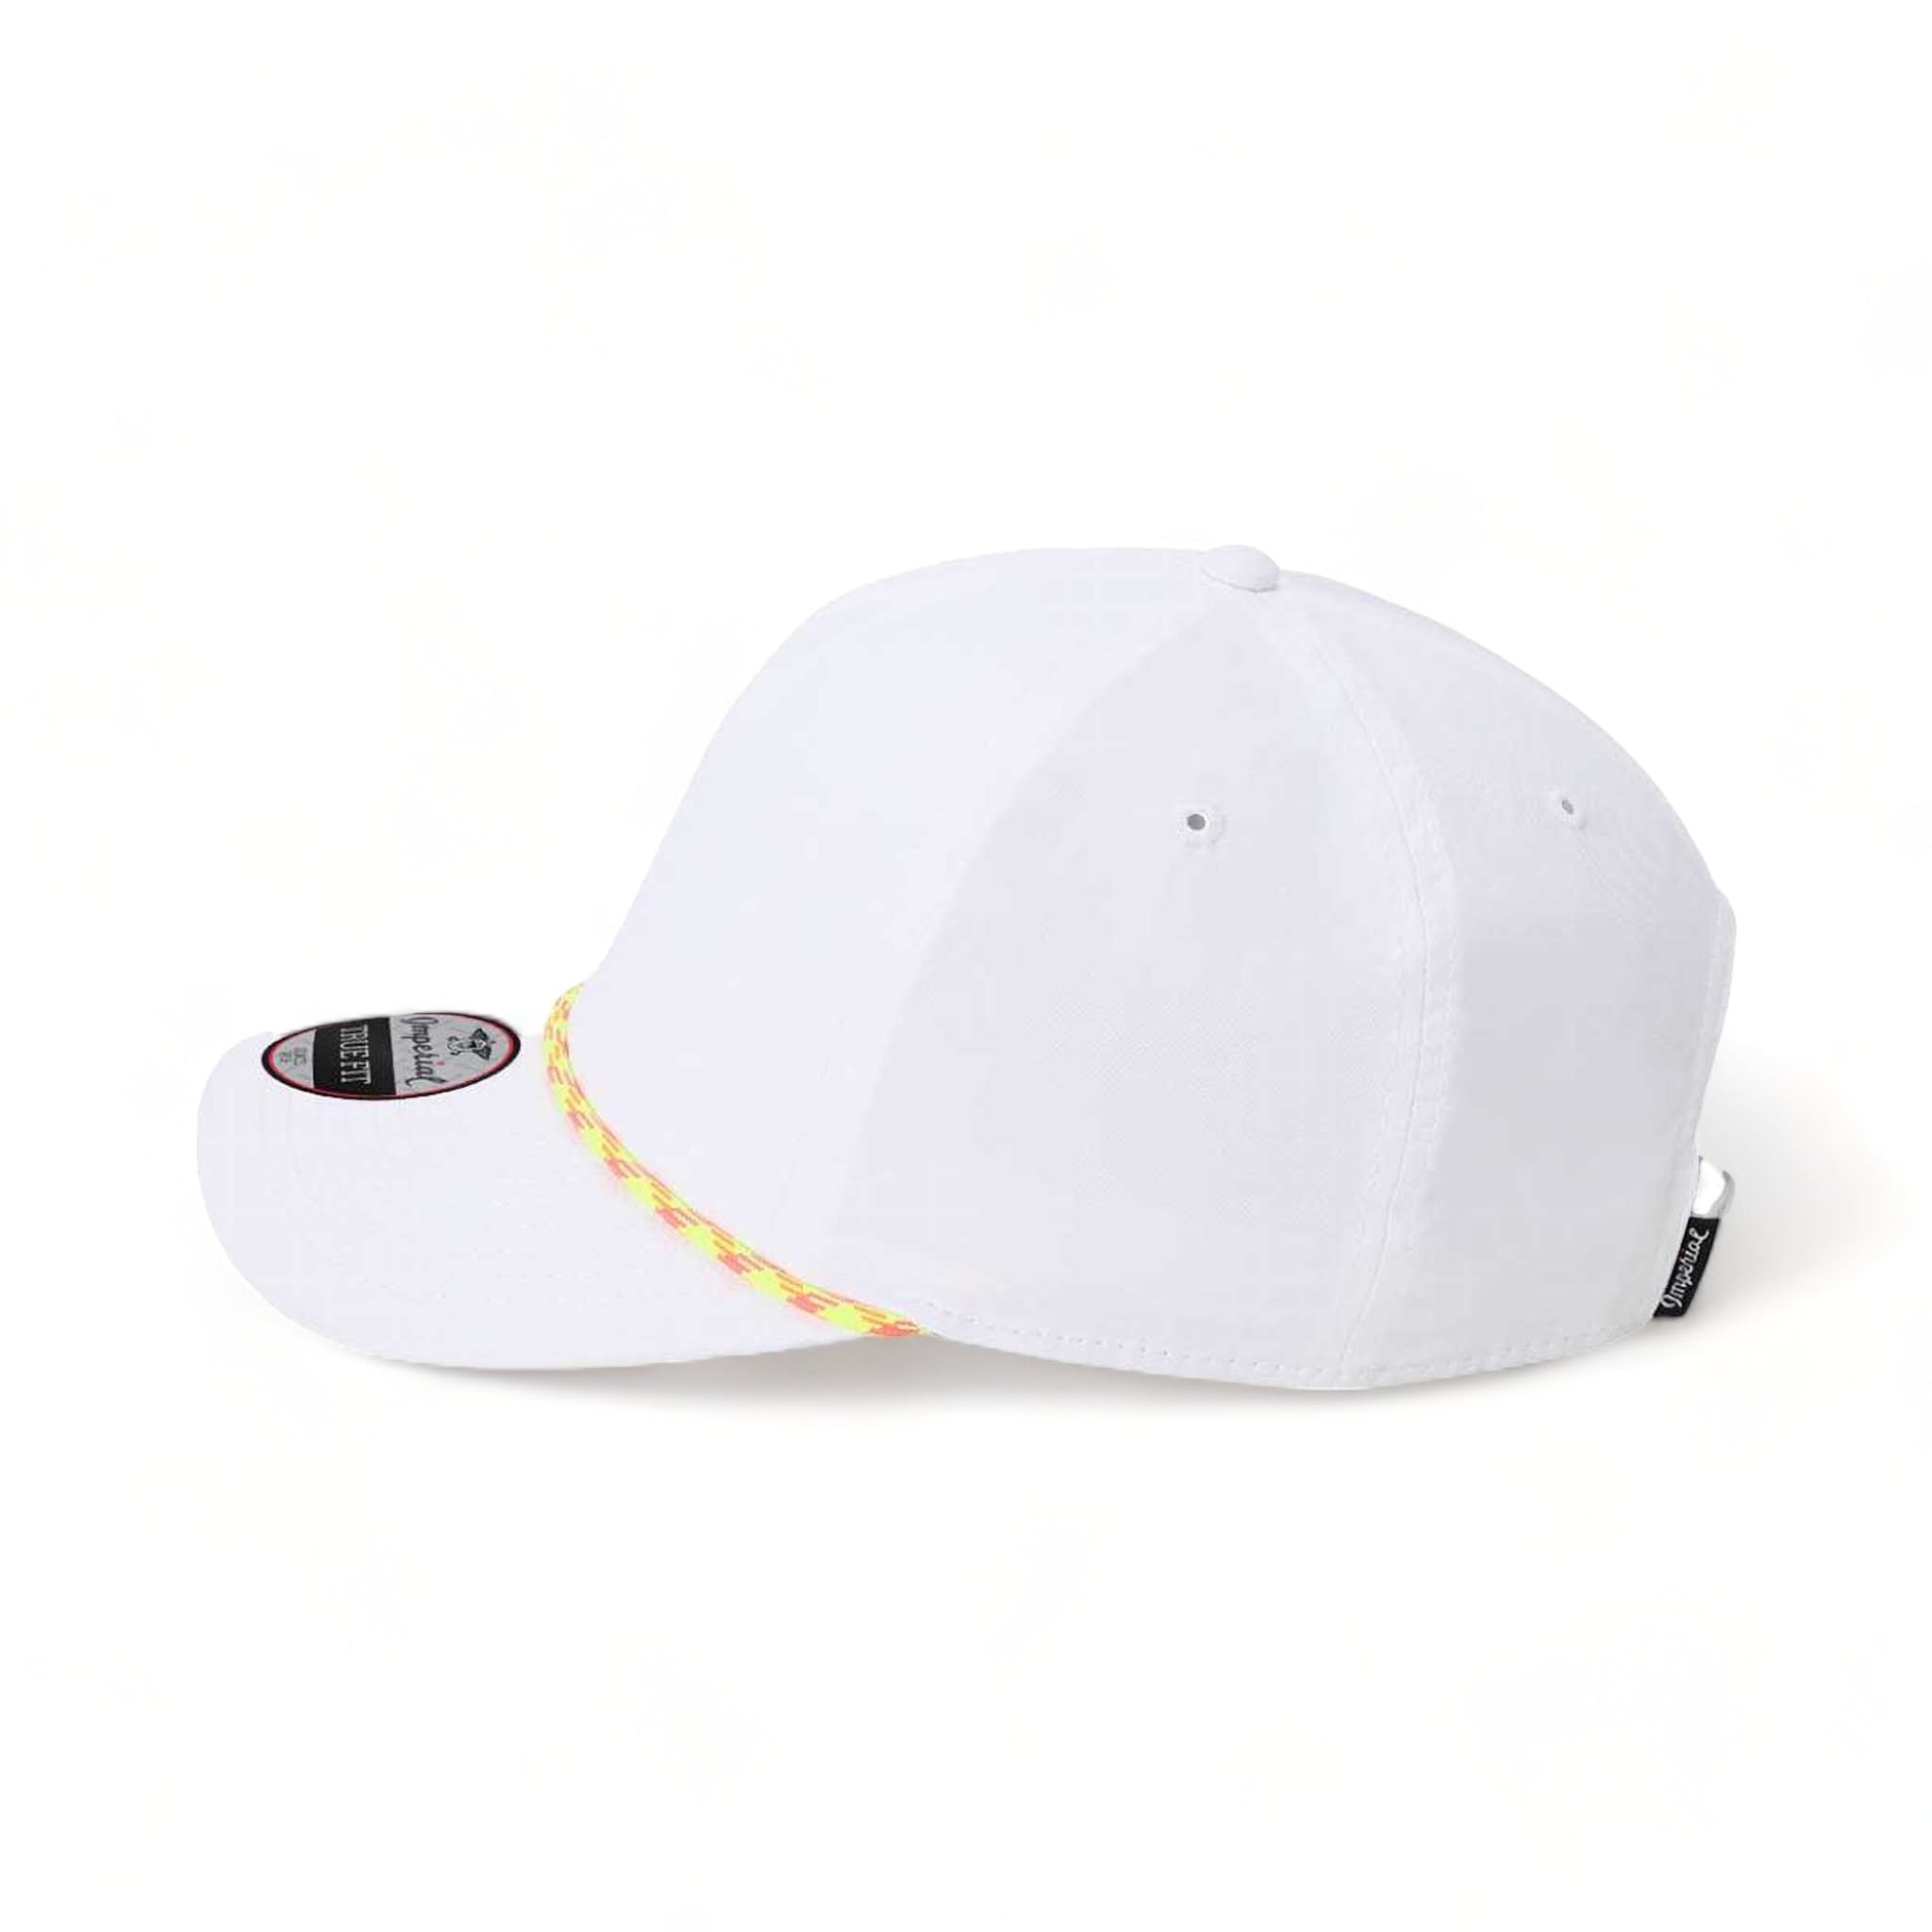 Side view of Imperial 5054 custom hat in white and neon mix